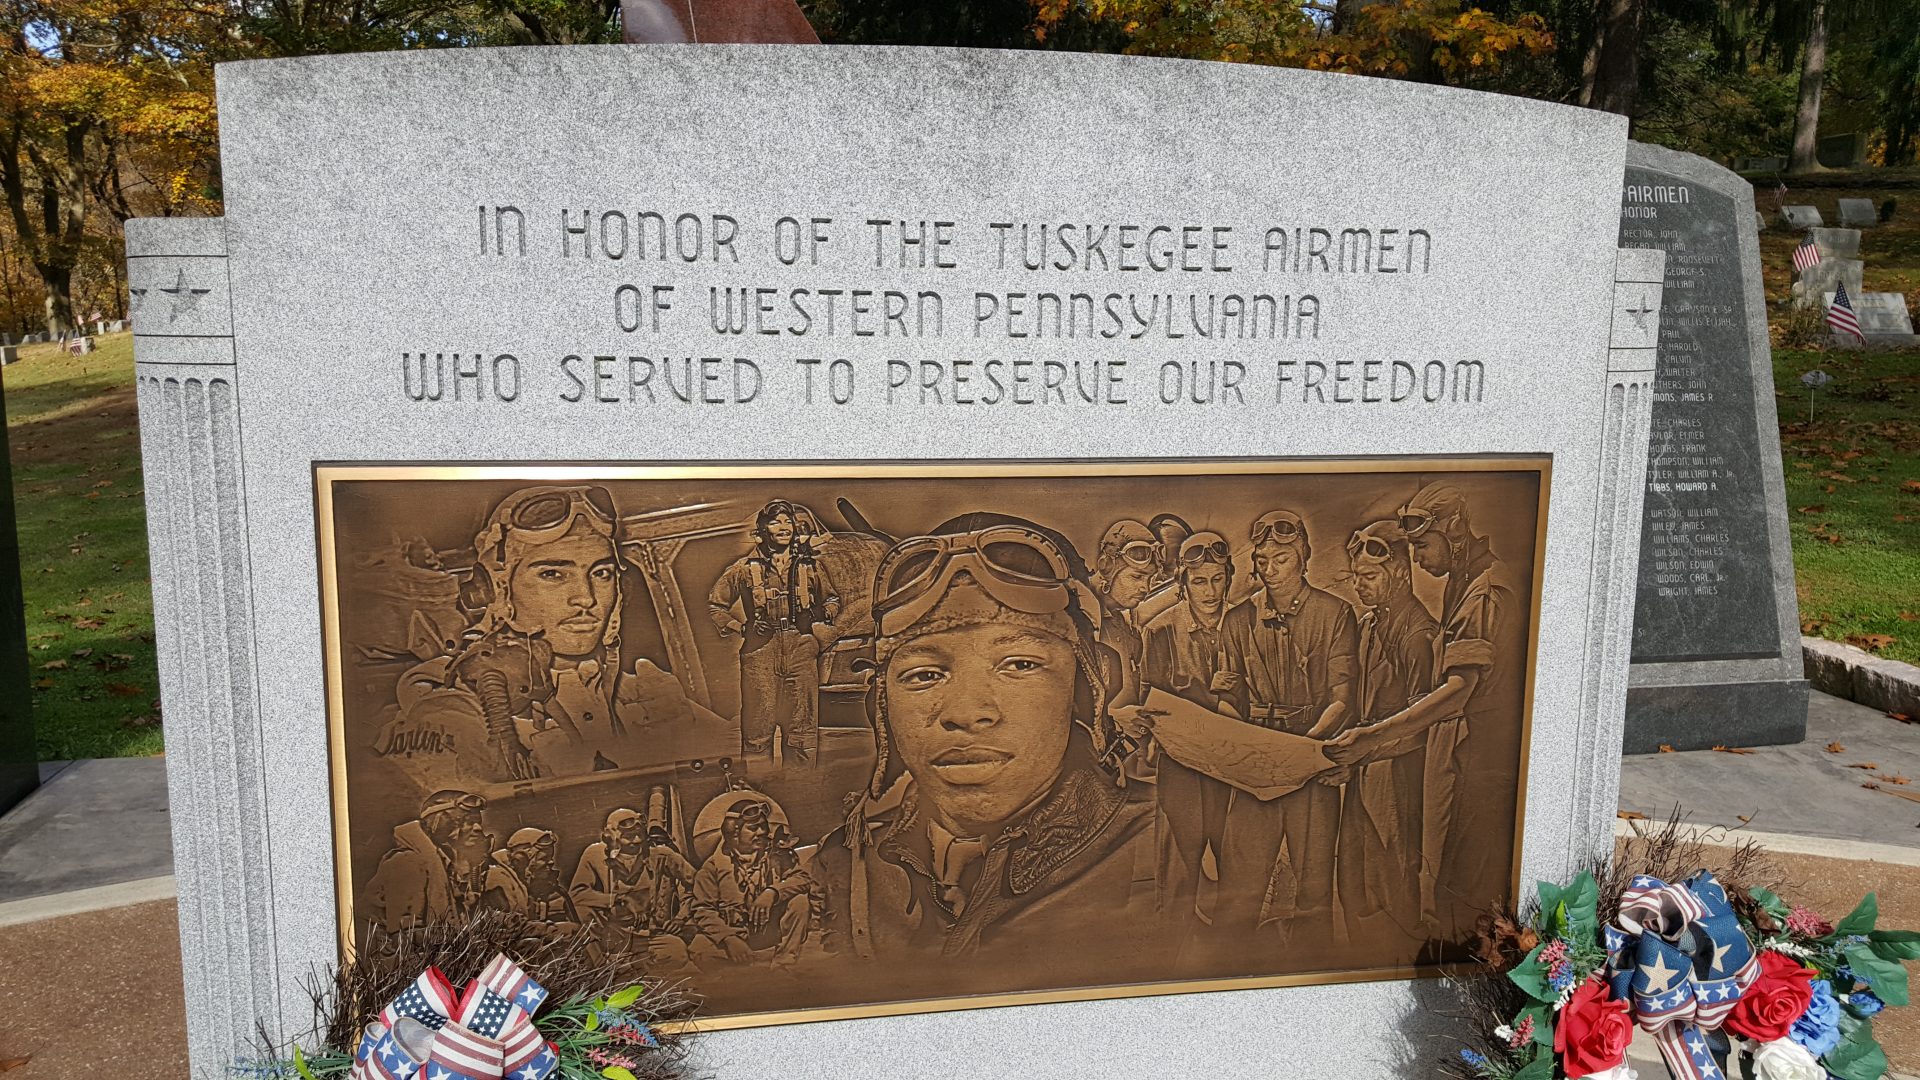 The Tuskegee Airman Memorial located in Sewickley Cemetery.